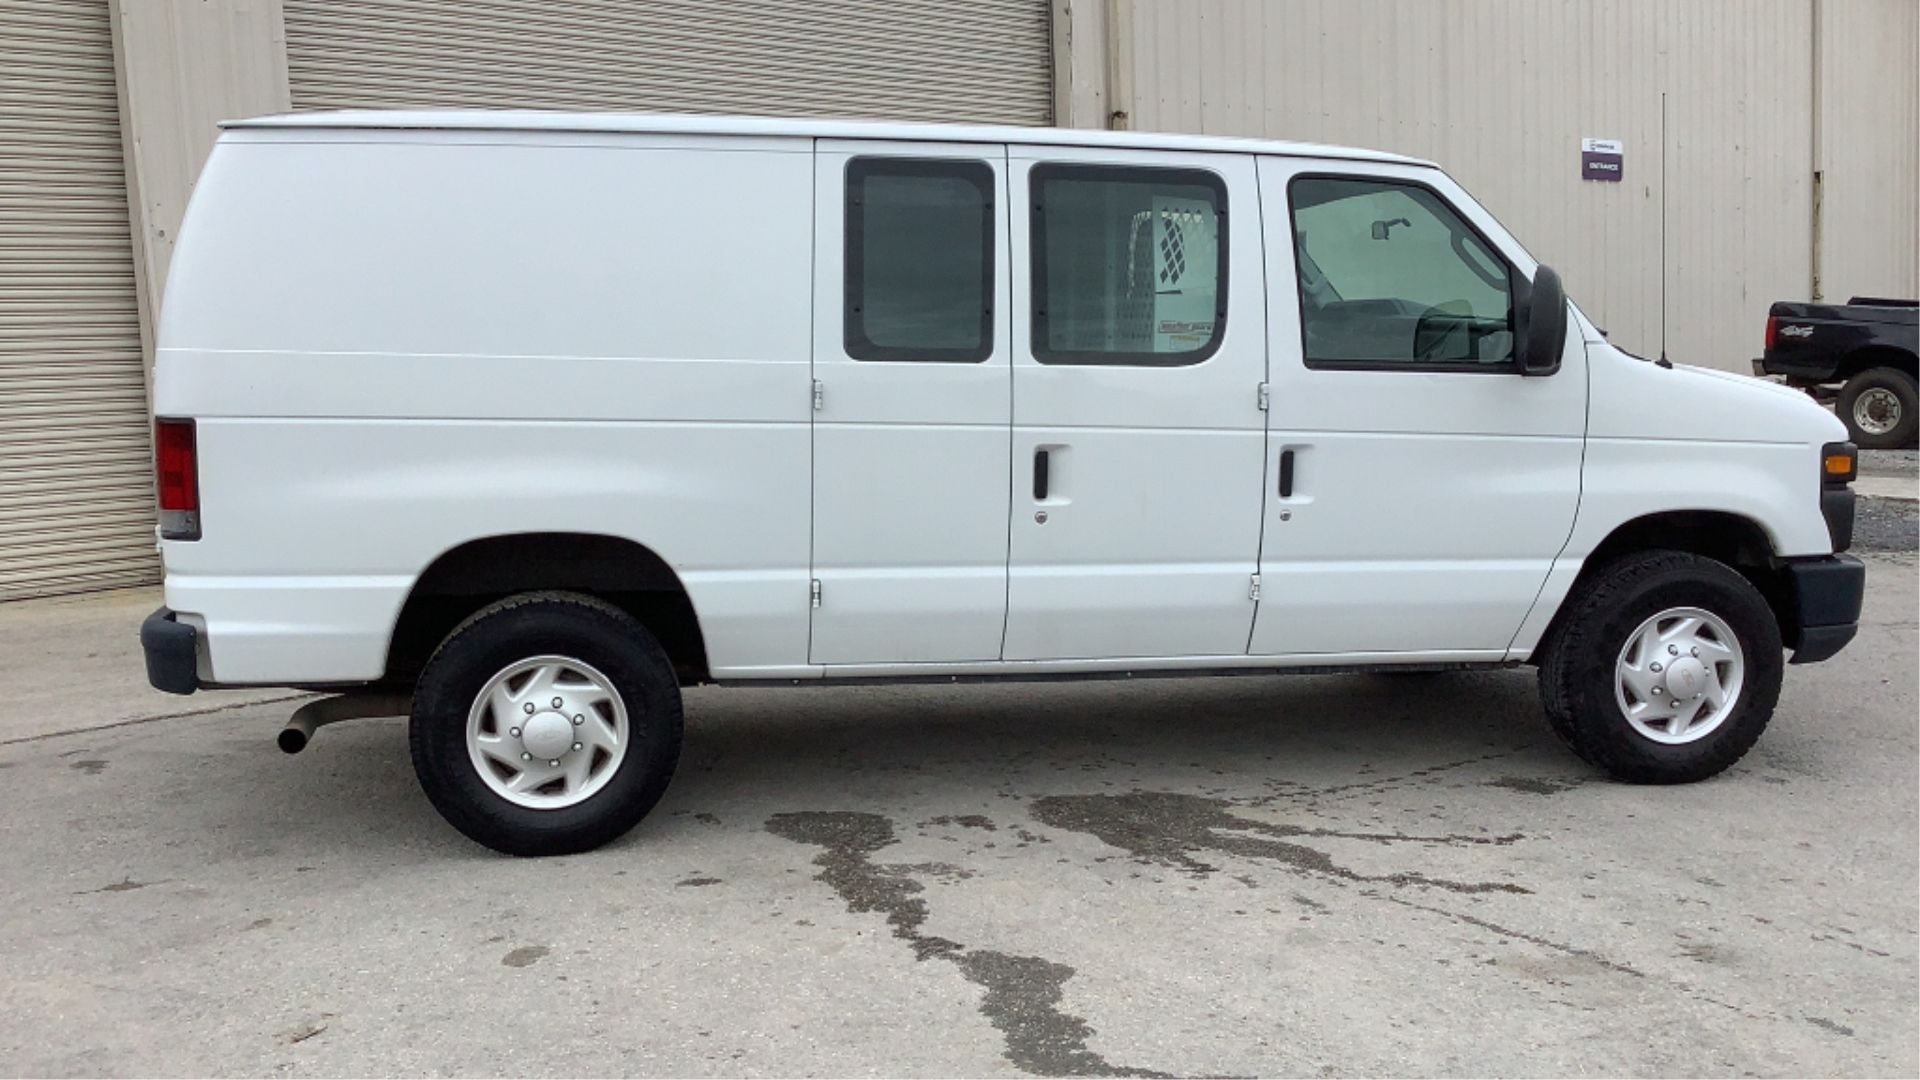 2009 Ford E-350 Cargo Van 2WD Super Duty - Image 21 of 74